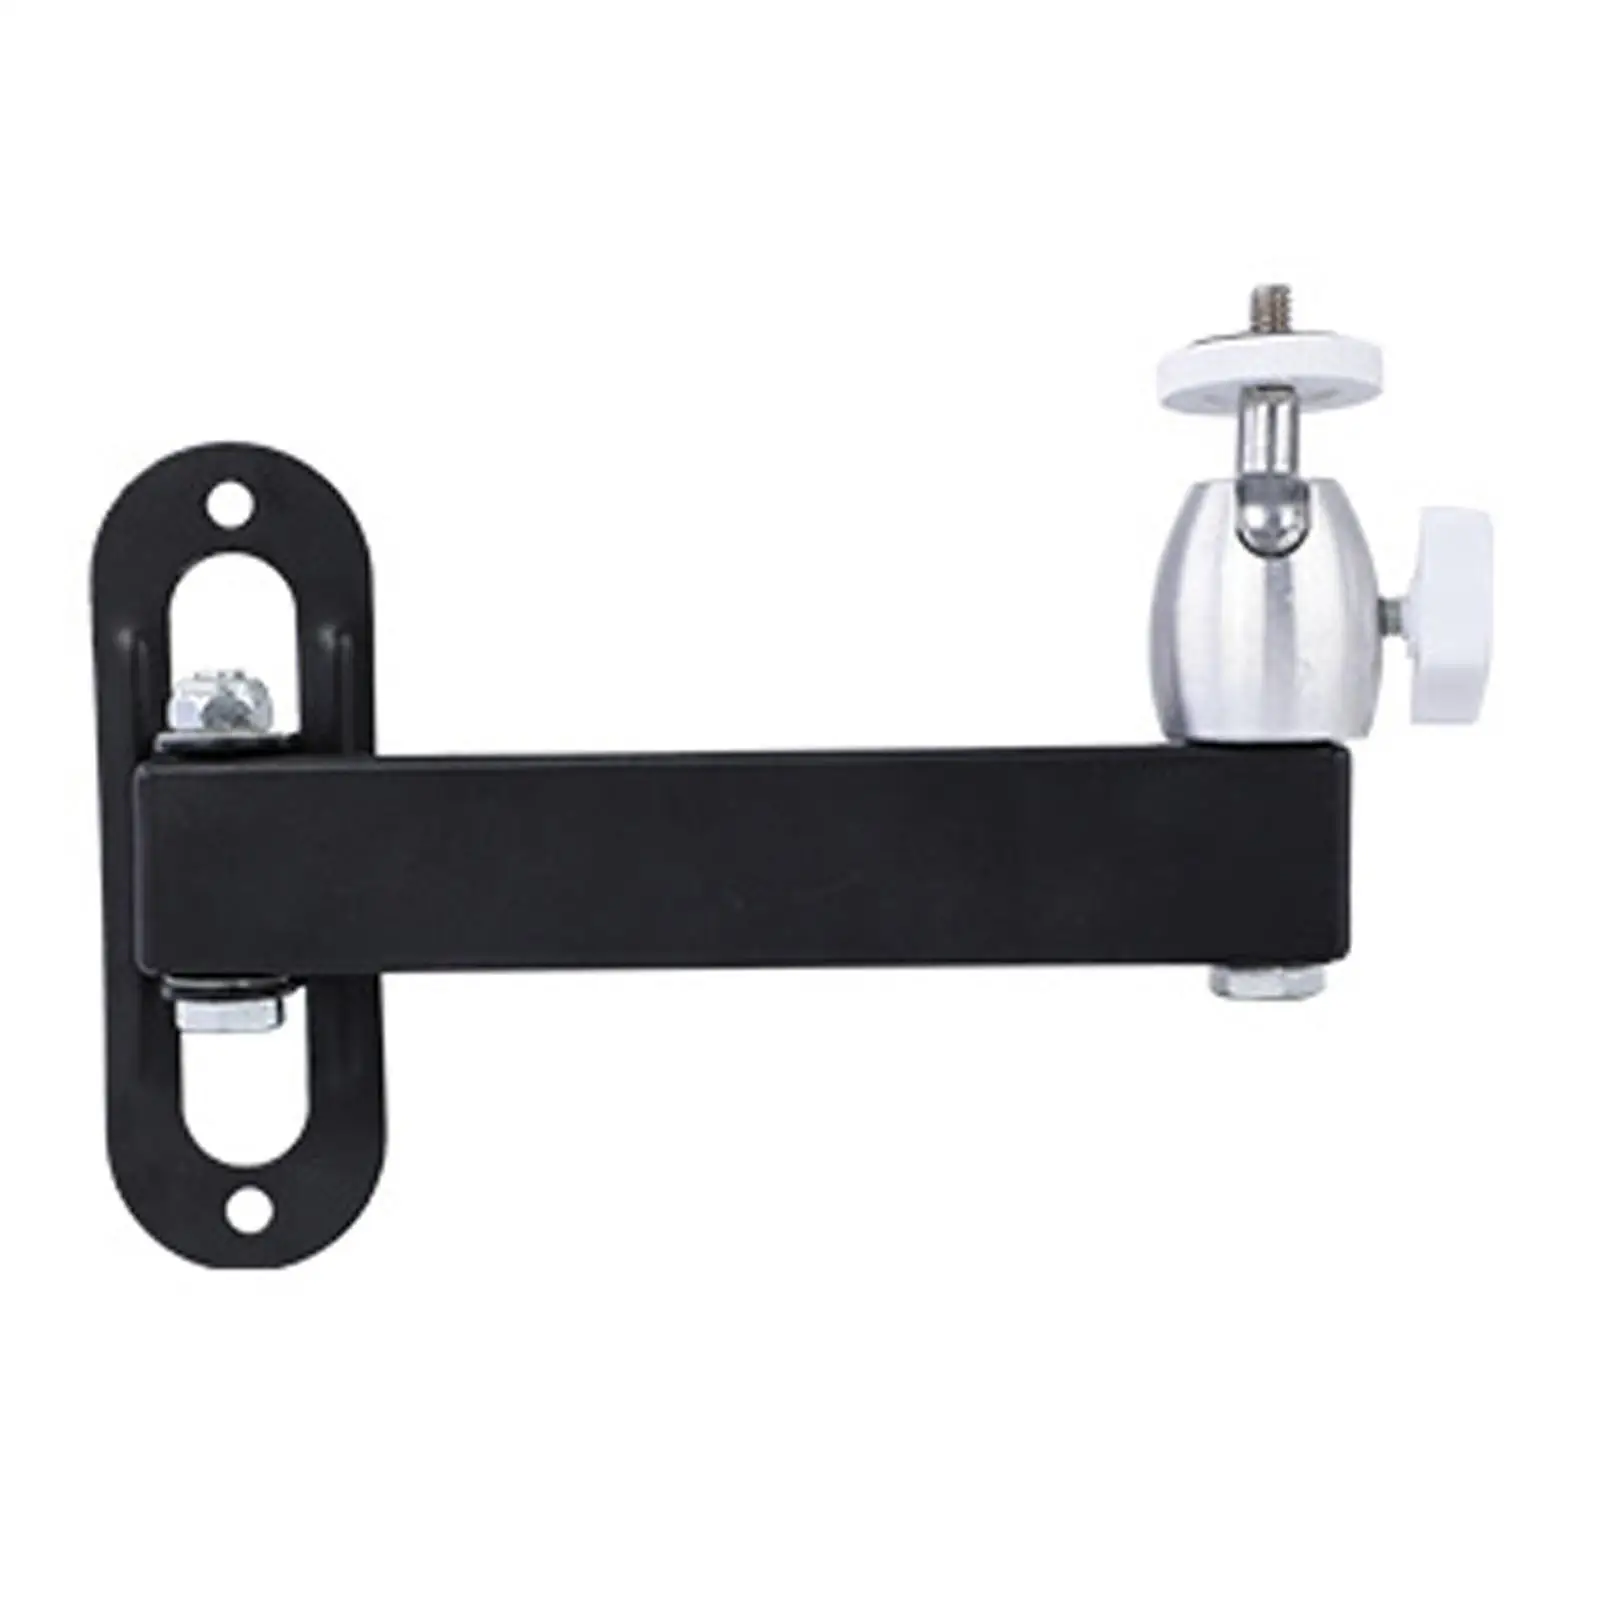 Wall Mounting Projector Mount Bracket Easy to Install Durable Adjustable Wall Support Ceiling Bracket Holder for Bedside Office